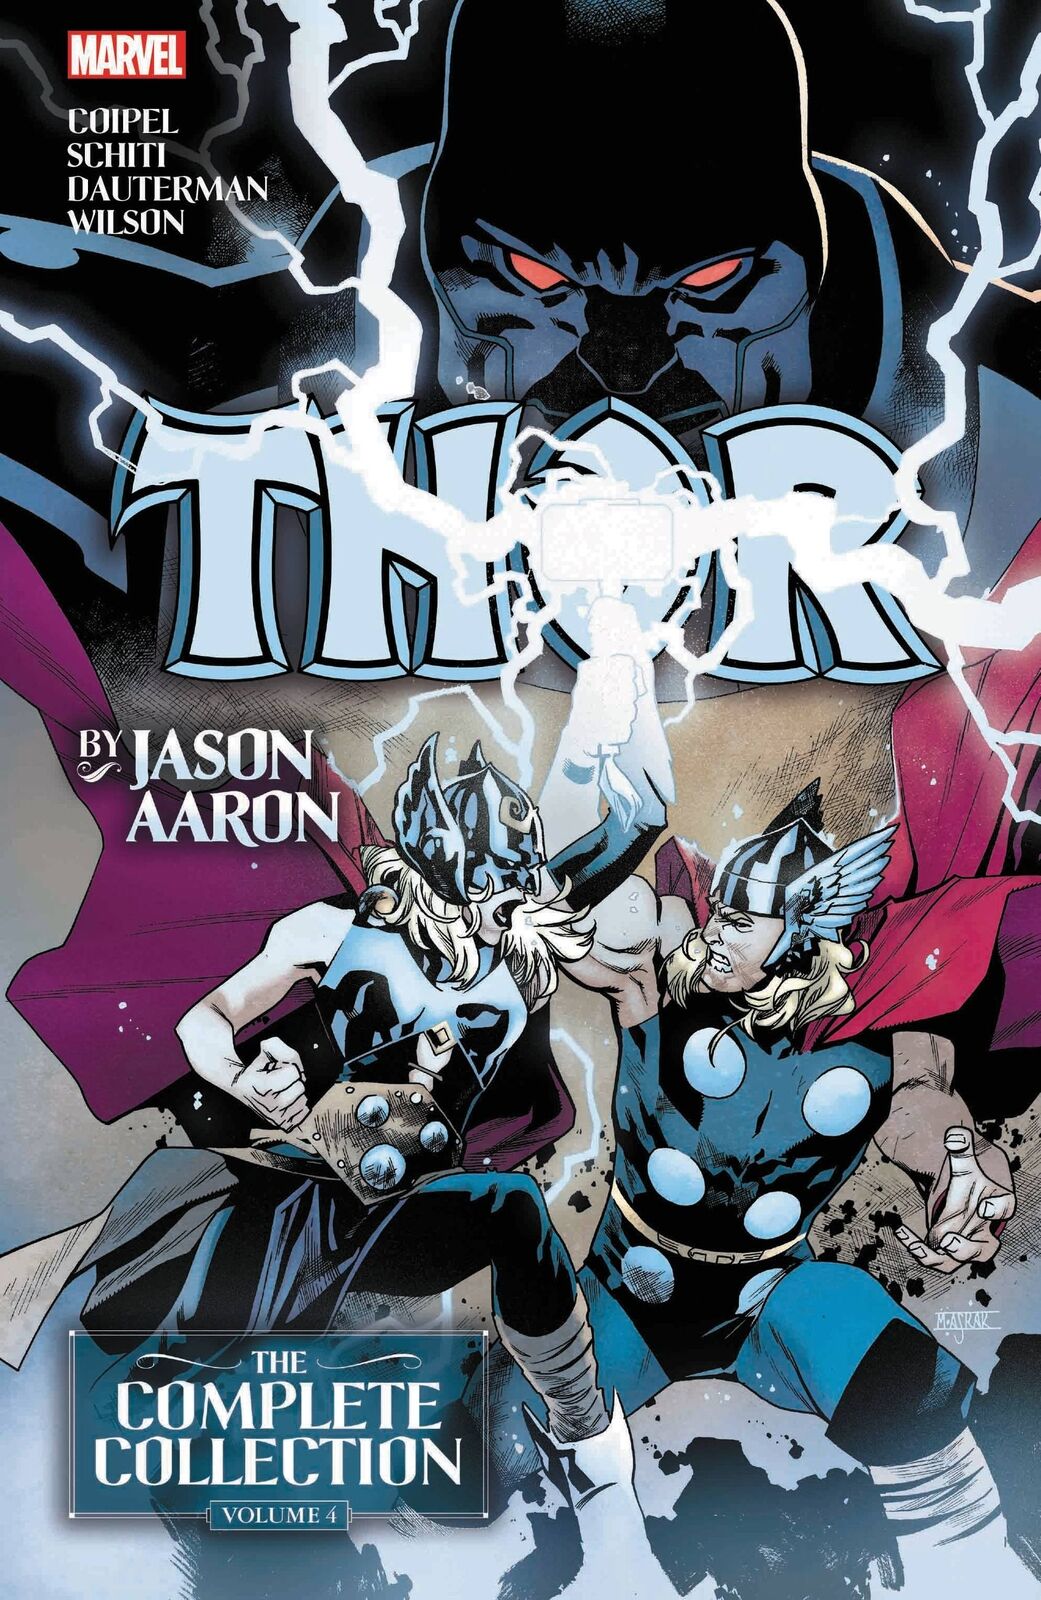 THOR BY JASON AARON: THE COMPLETE COLLECTION VOL. 4 (Thor: The Complete